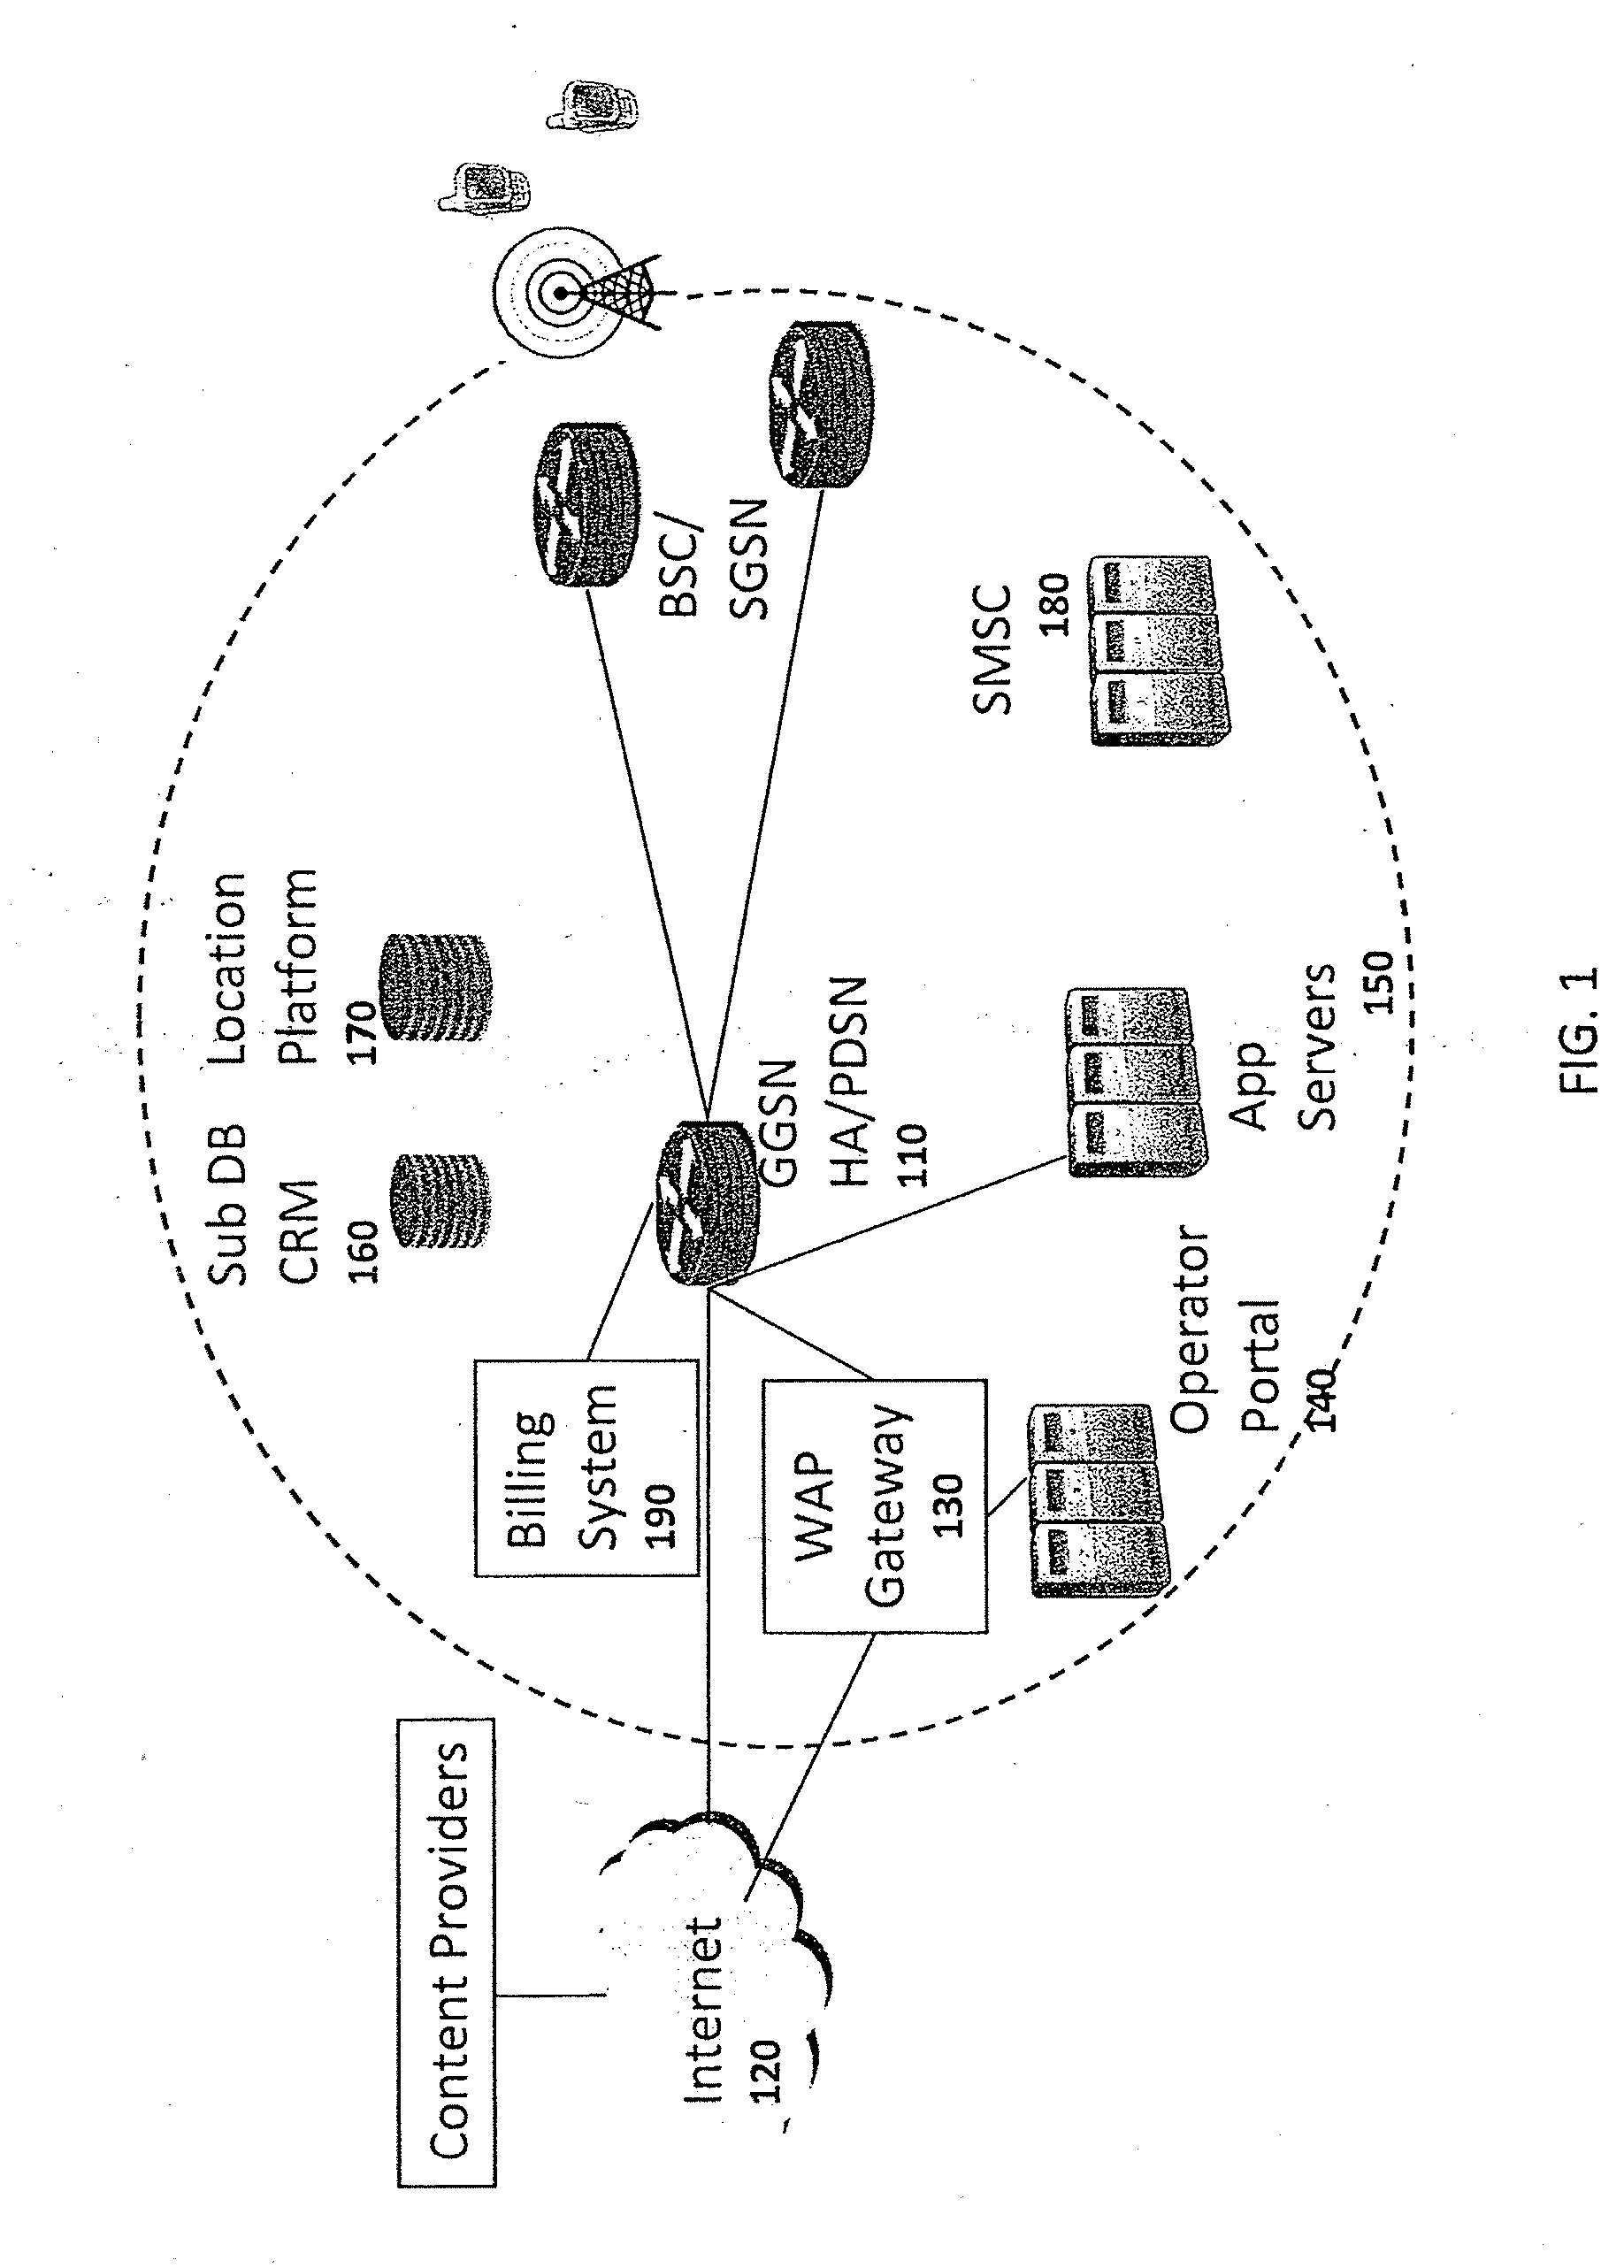 Method and apparatus for storing data on application-level activity and other user information to enable real-time multi-dimensional reporting about user of a mobile data network